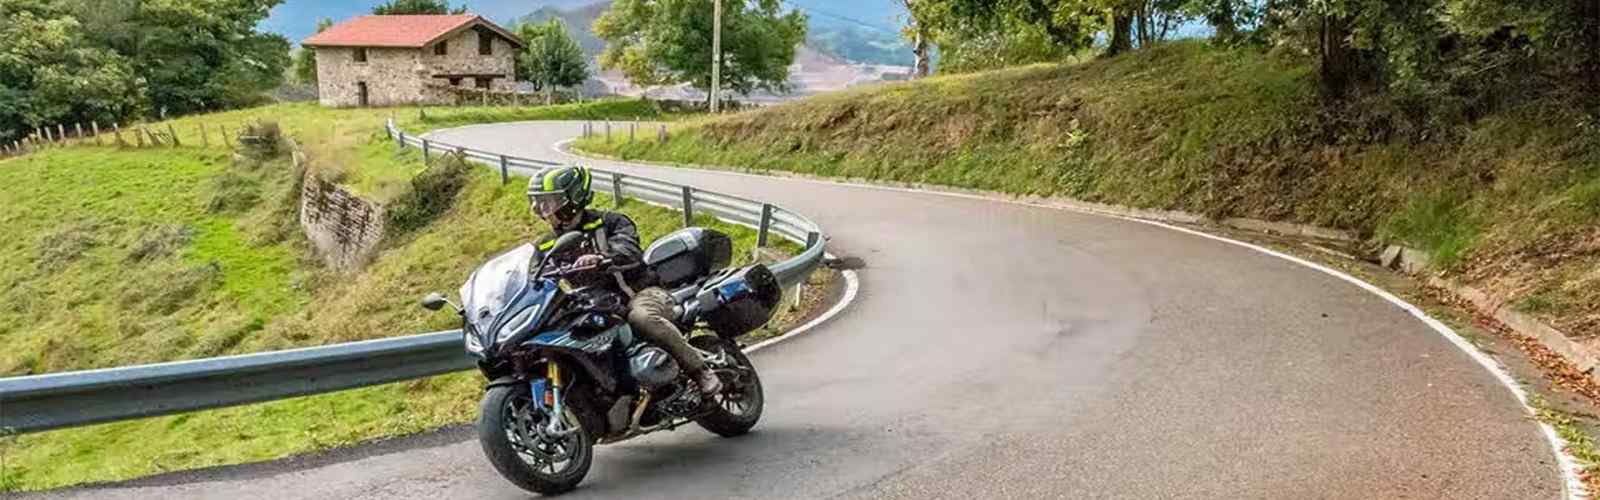 Motorcycle itinerary along the South Tyrol Wine Road